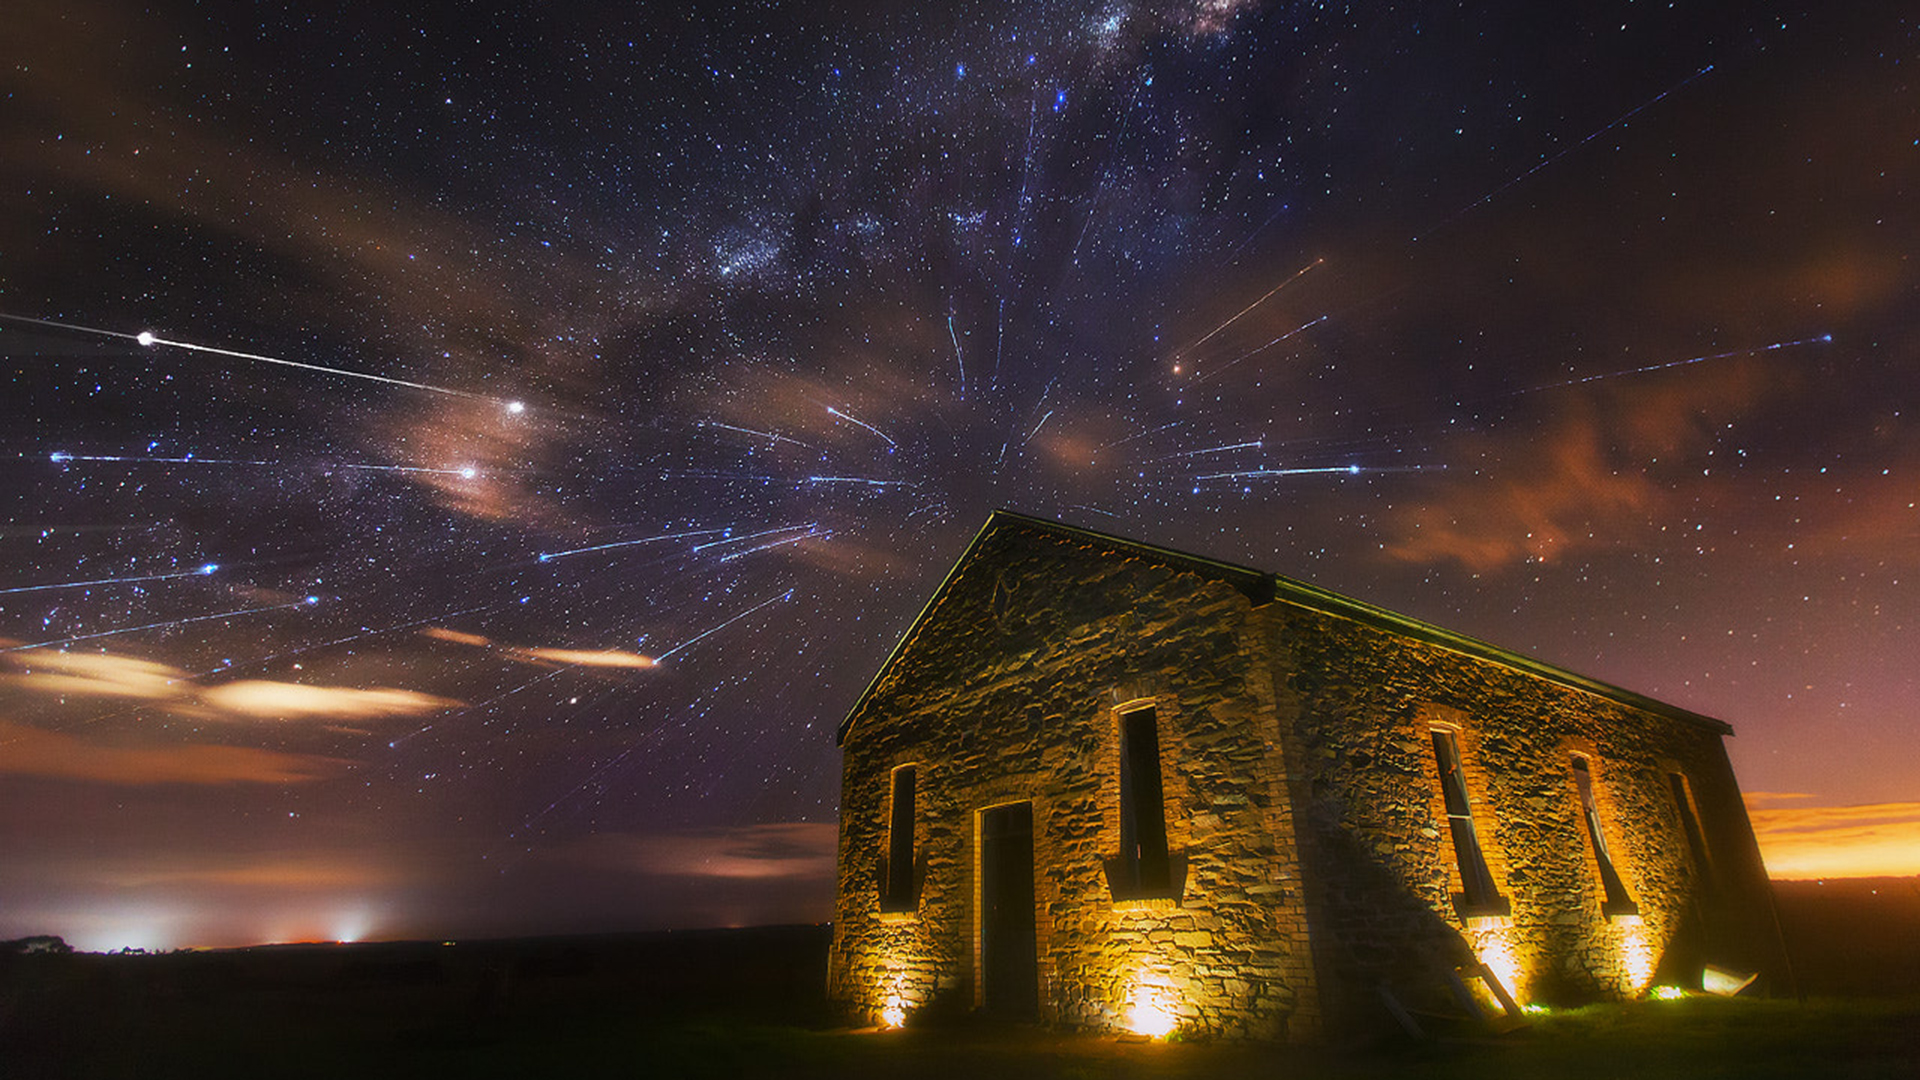 20 meteor shower photos thatll inspire you to shoot the Leonids